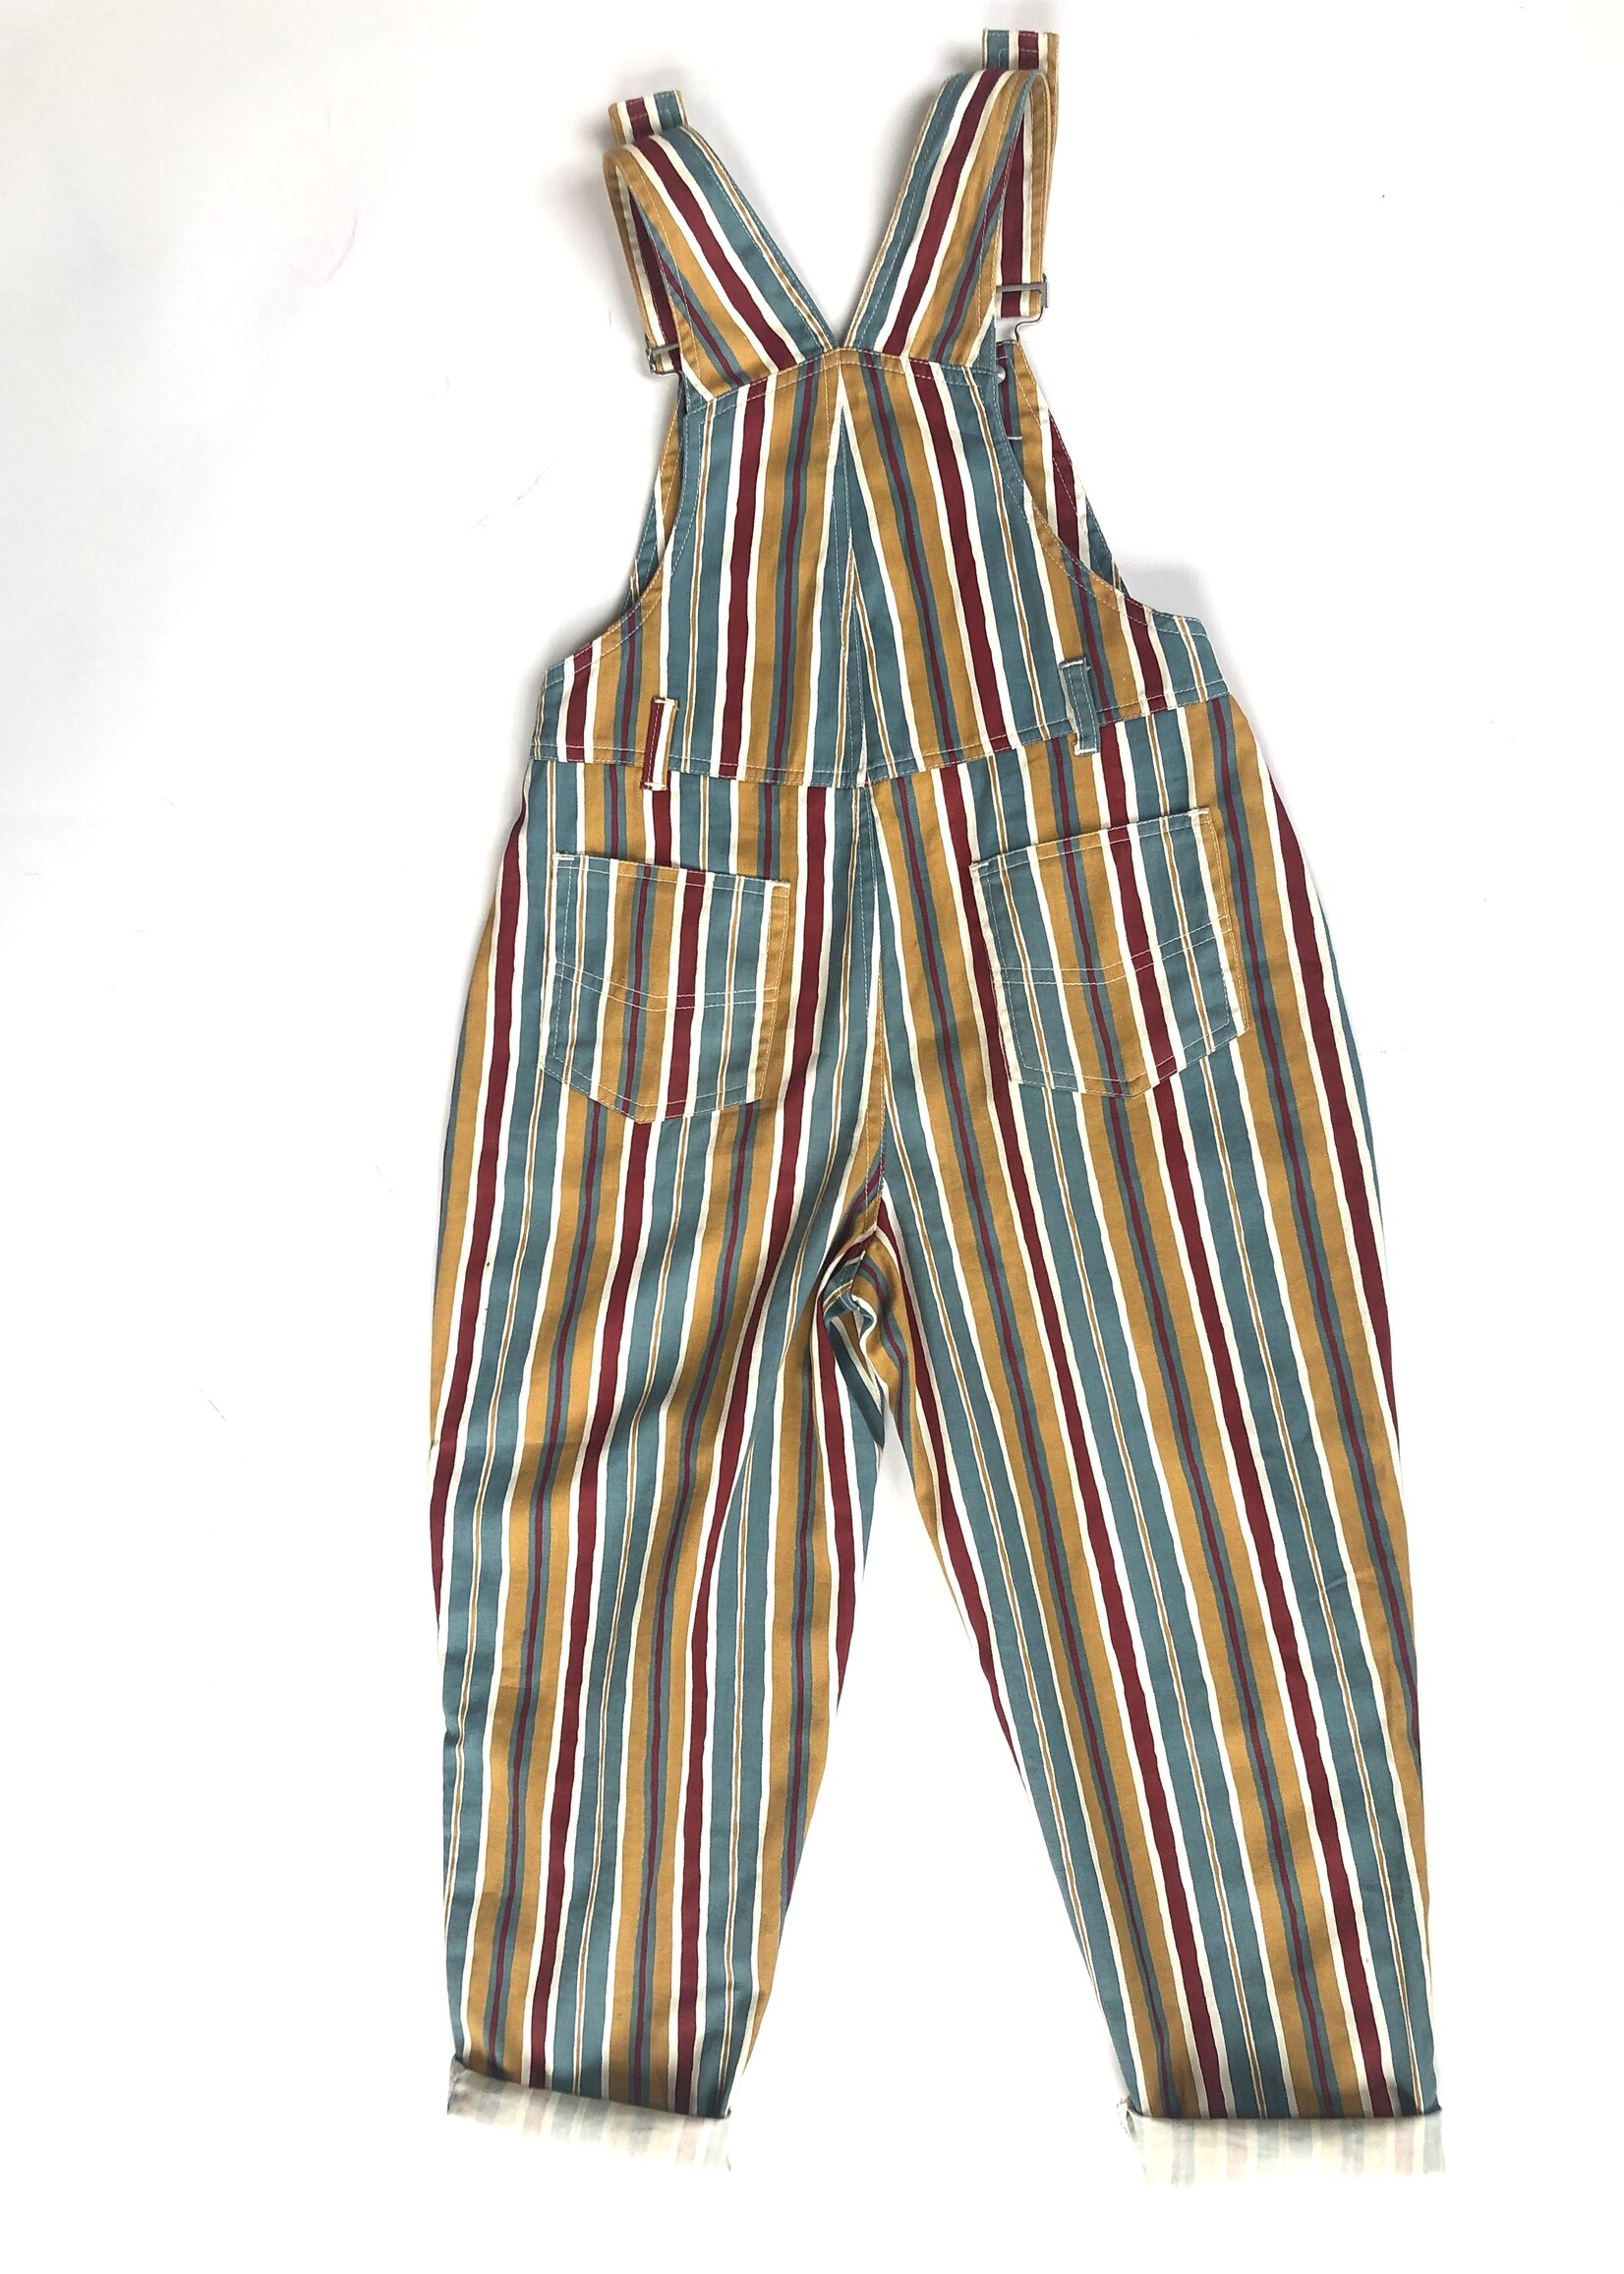 Striped dungarees 8-9y